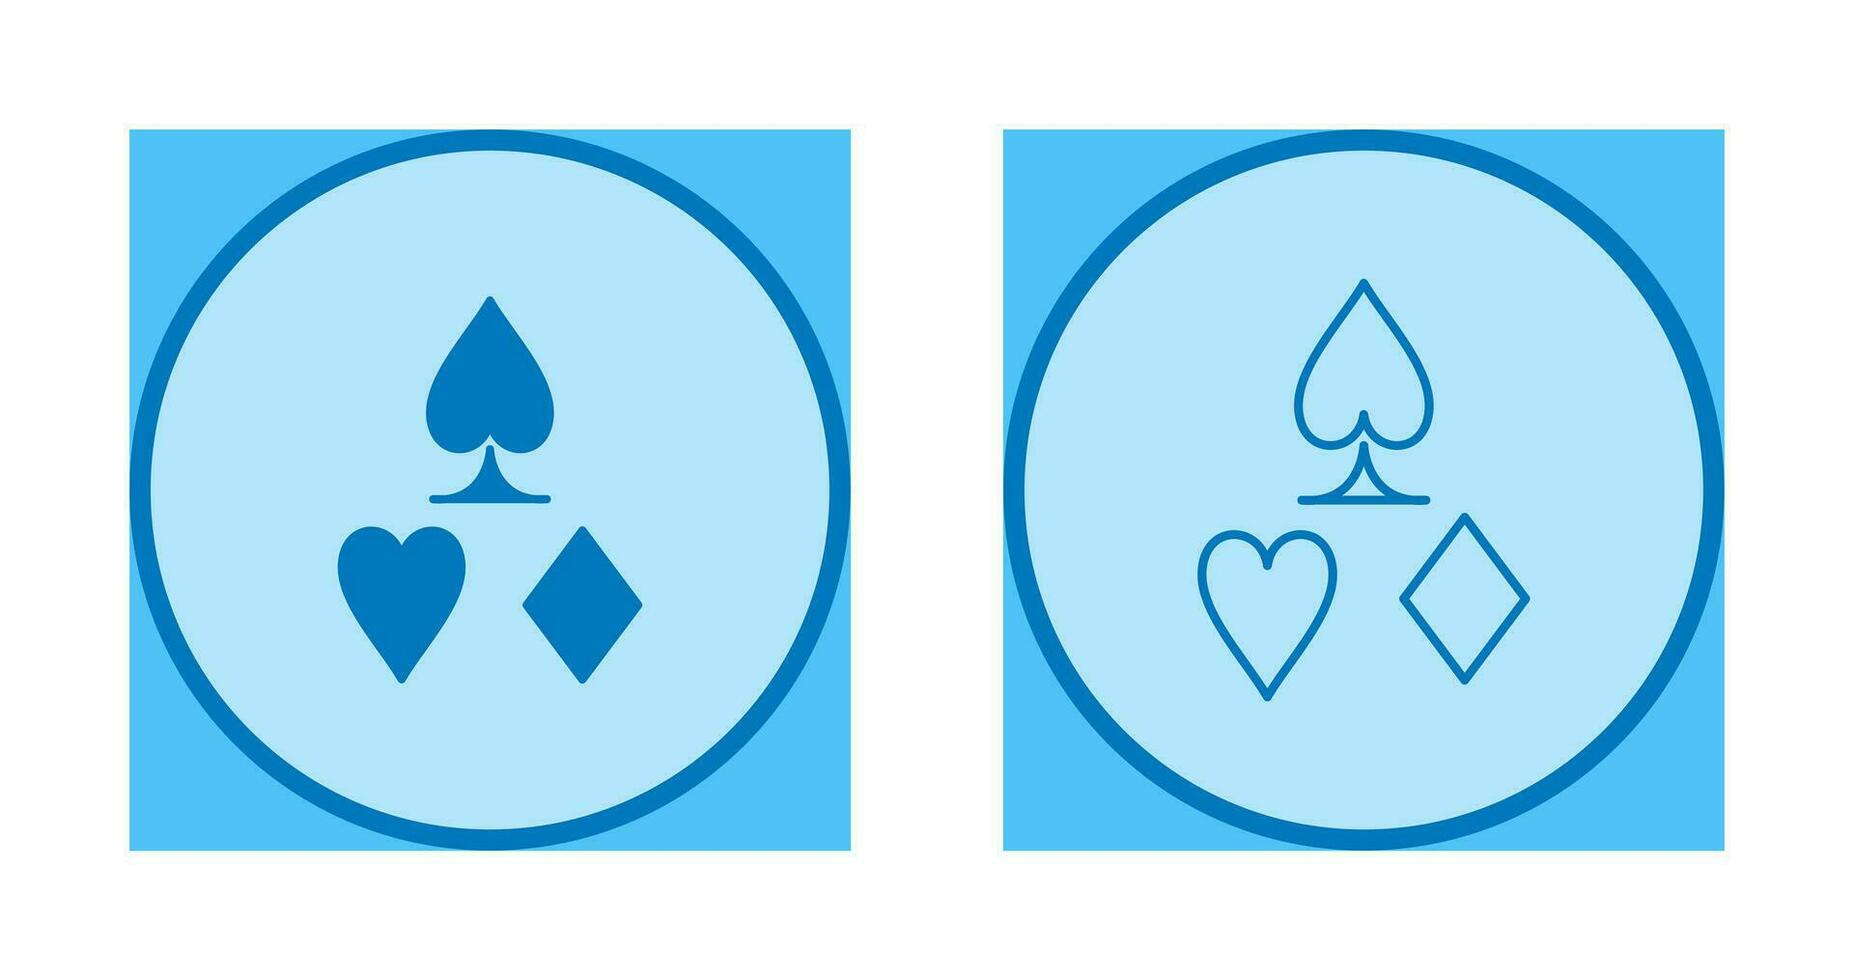 Card Suits Vector Icon